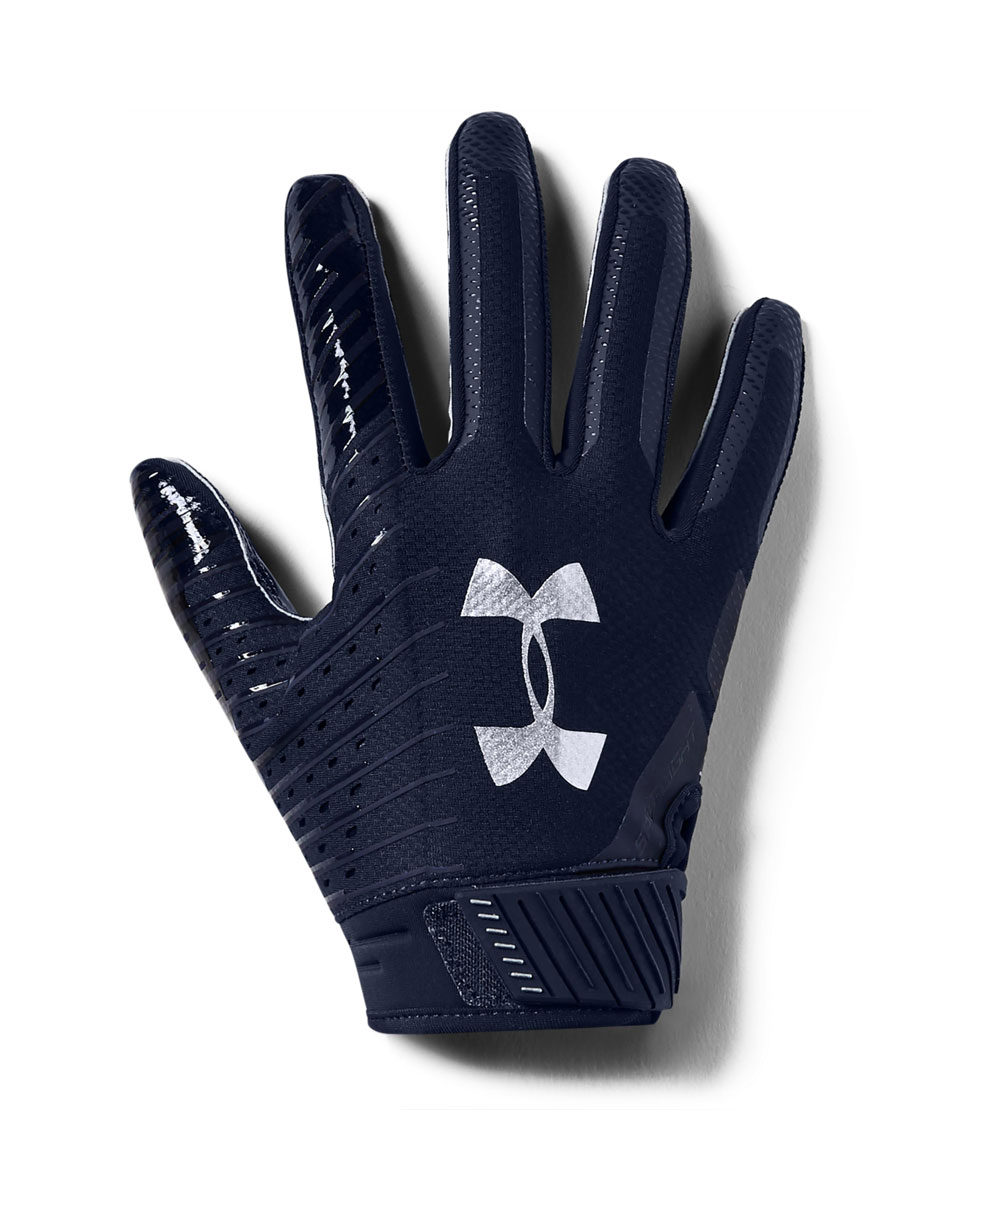 navy under armour basketball shoes